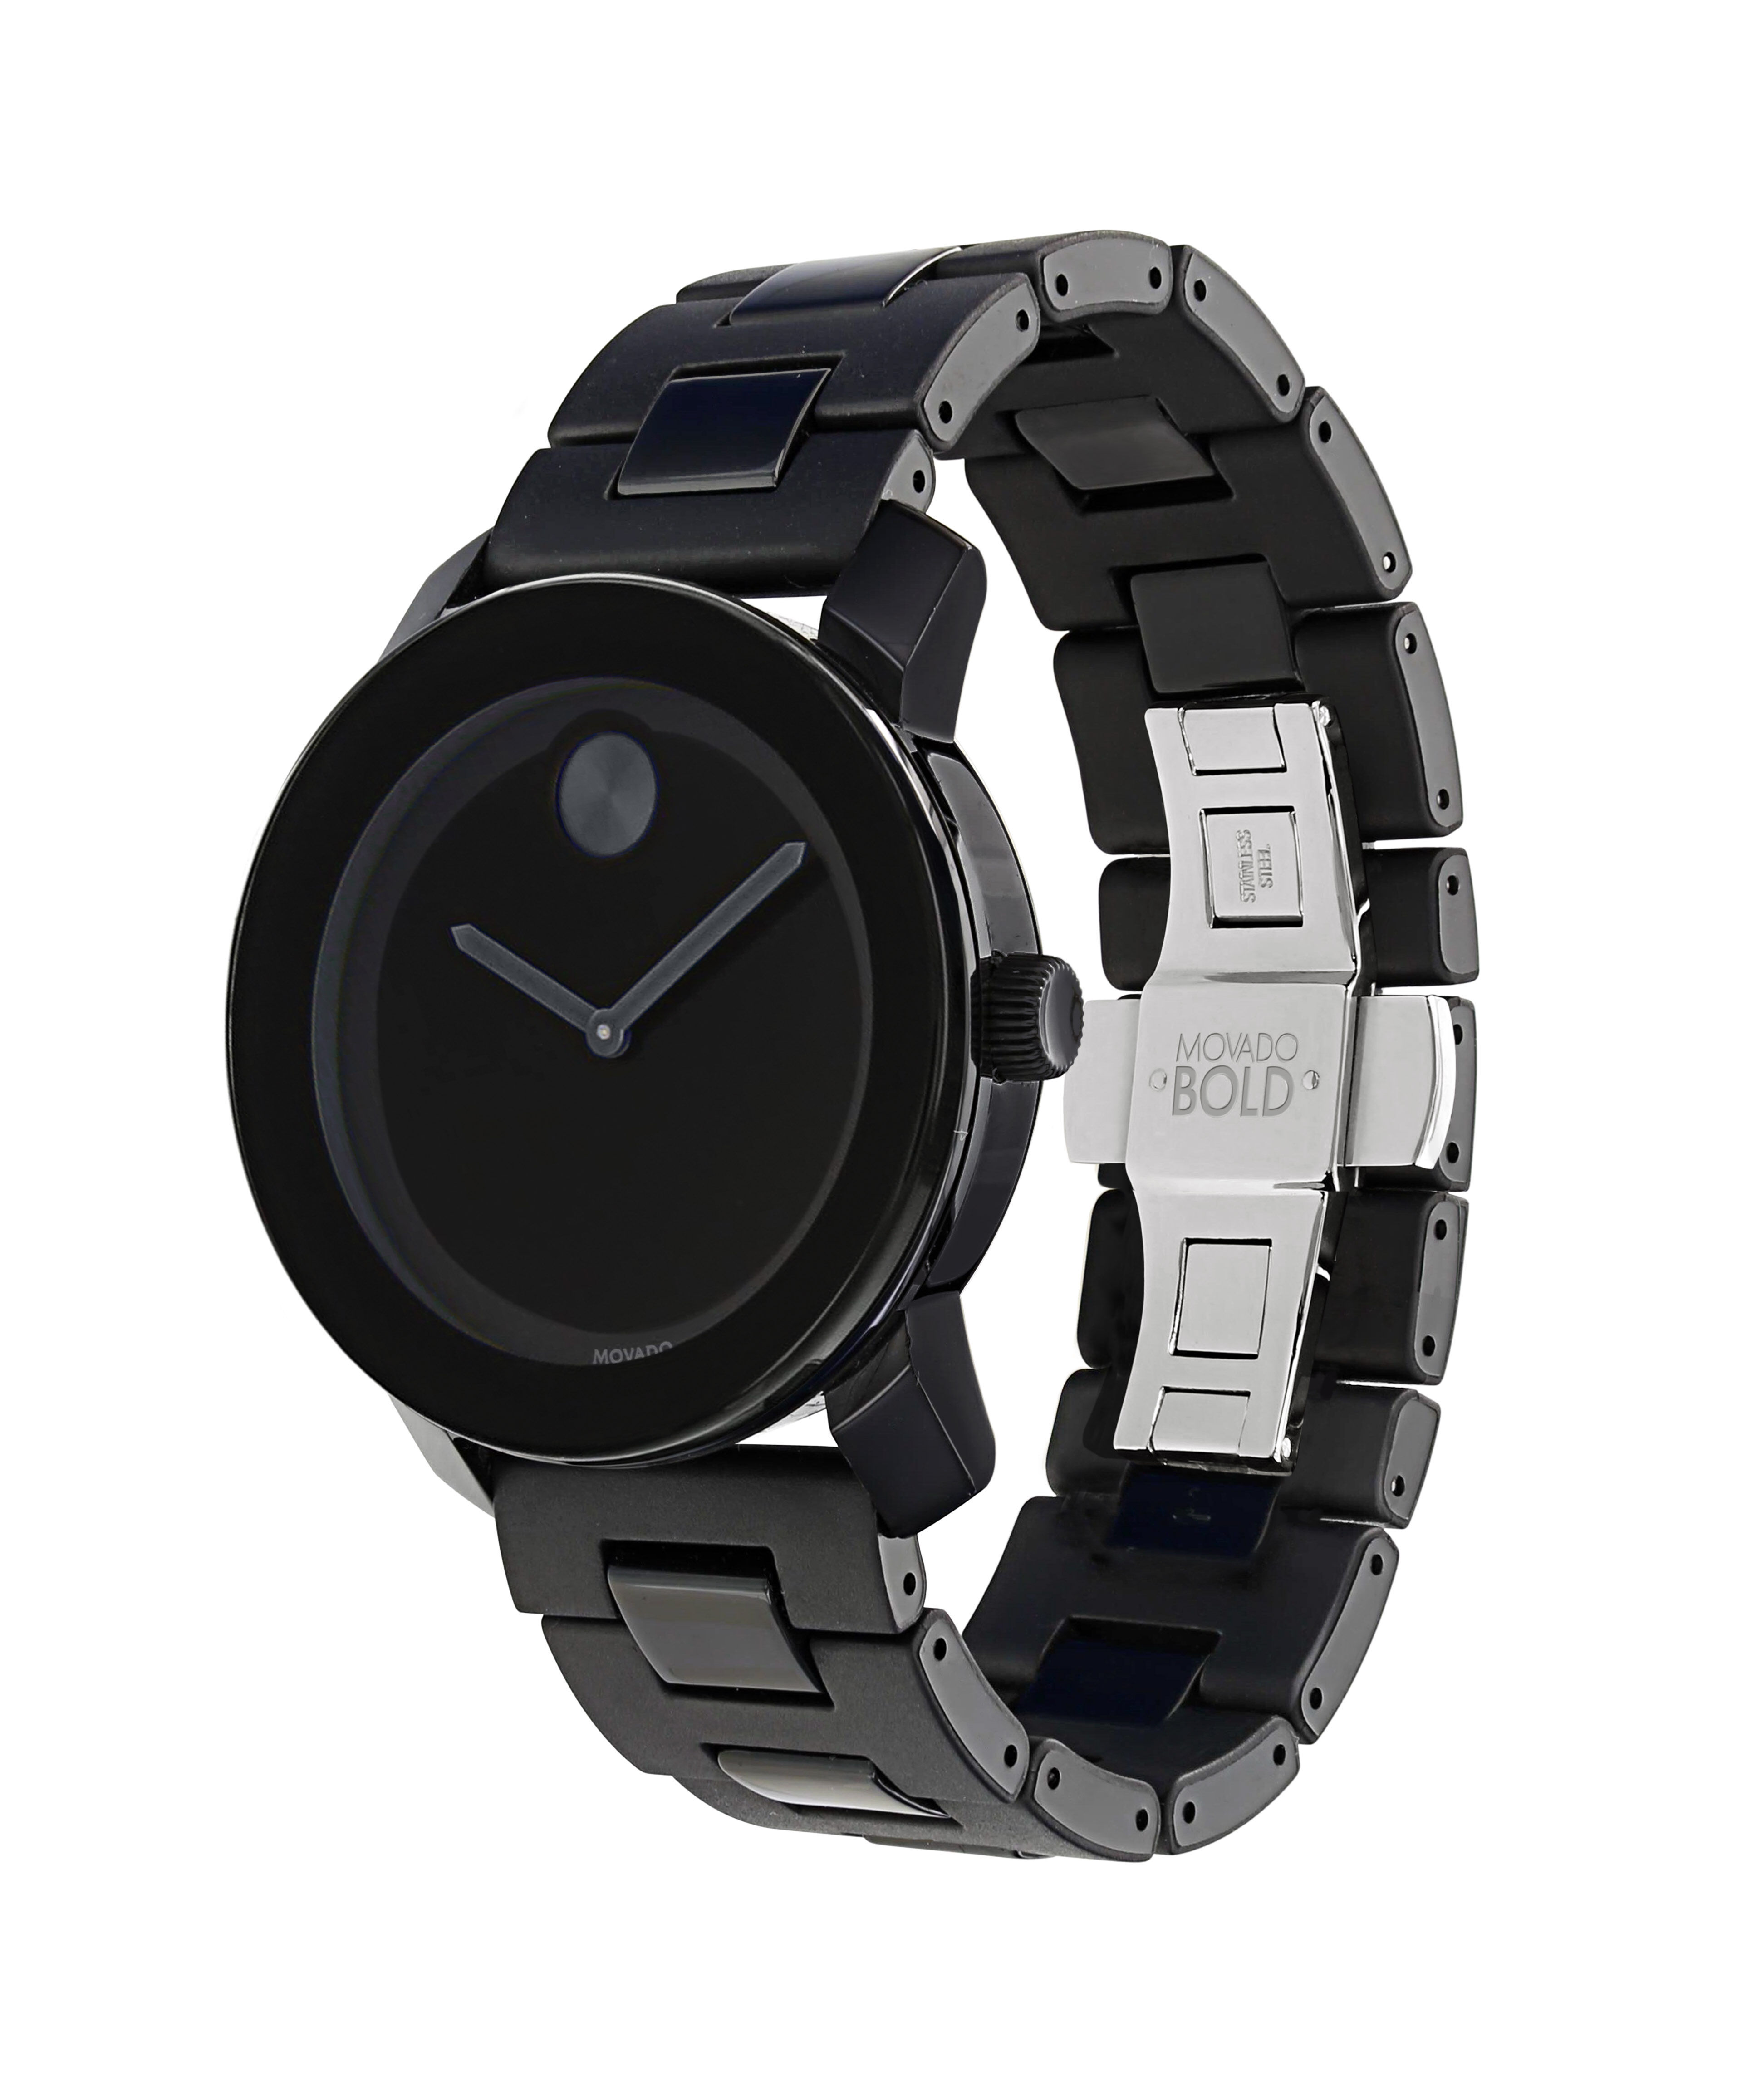 Movado Concerto 23.3.14.1117 S Women's Watch in Stainless Steel